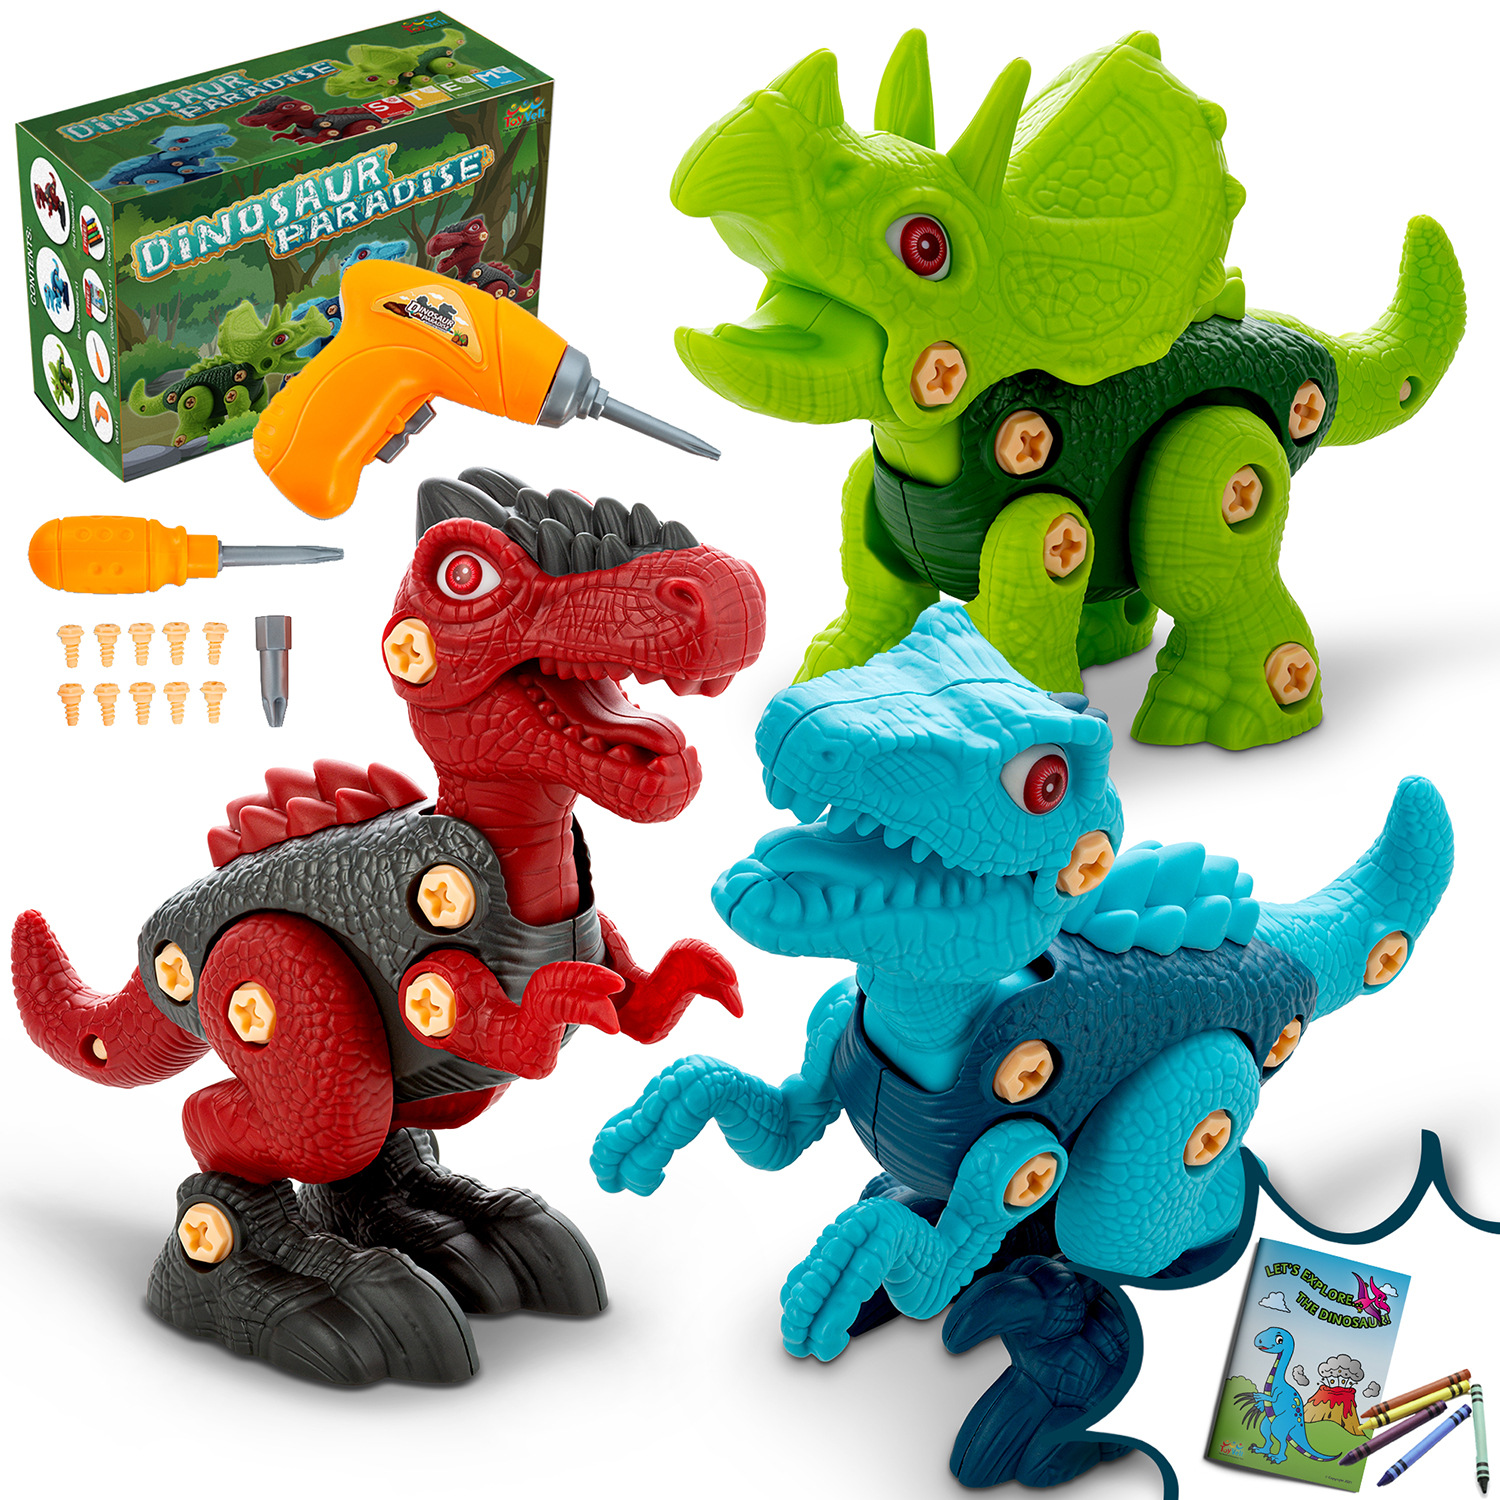 ToyVelt Dinosaur Take Apart Stem Toys for Boys & Girls Age 3 - 12 years old - Pack of 3 huge Dinosaurs, With Electric Drill, Dinosaur Toys Christmas Birthday Gifts Boys Girls - image 1 of 8